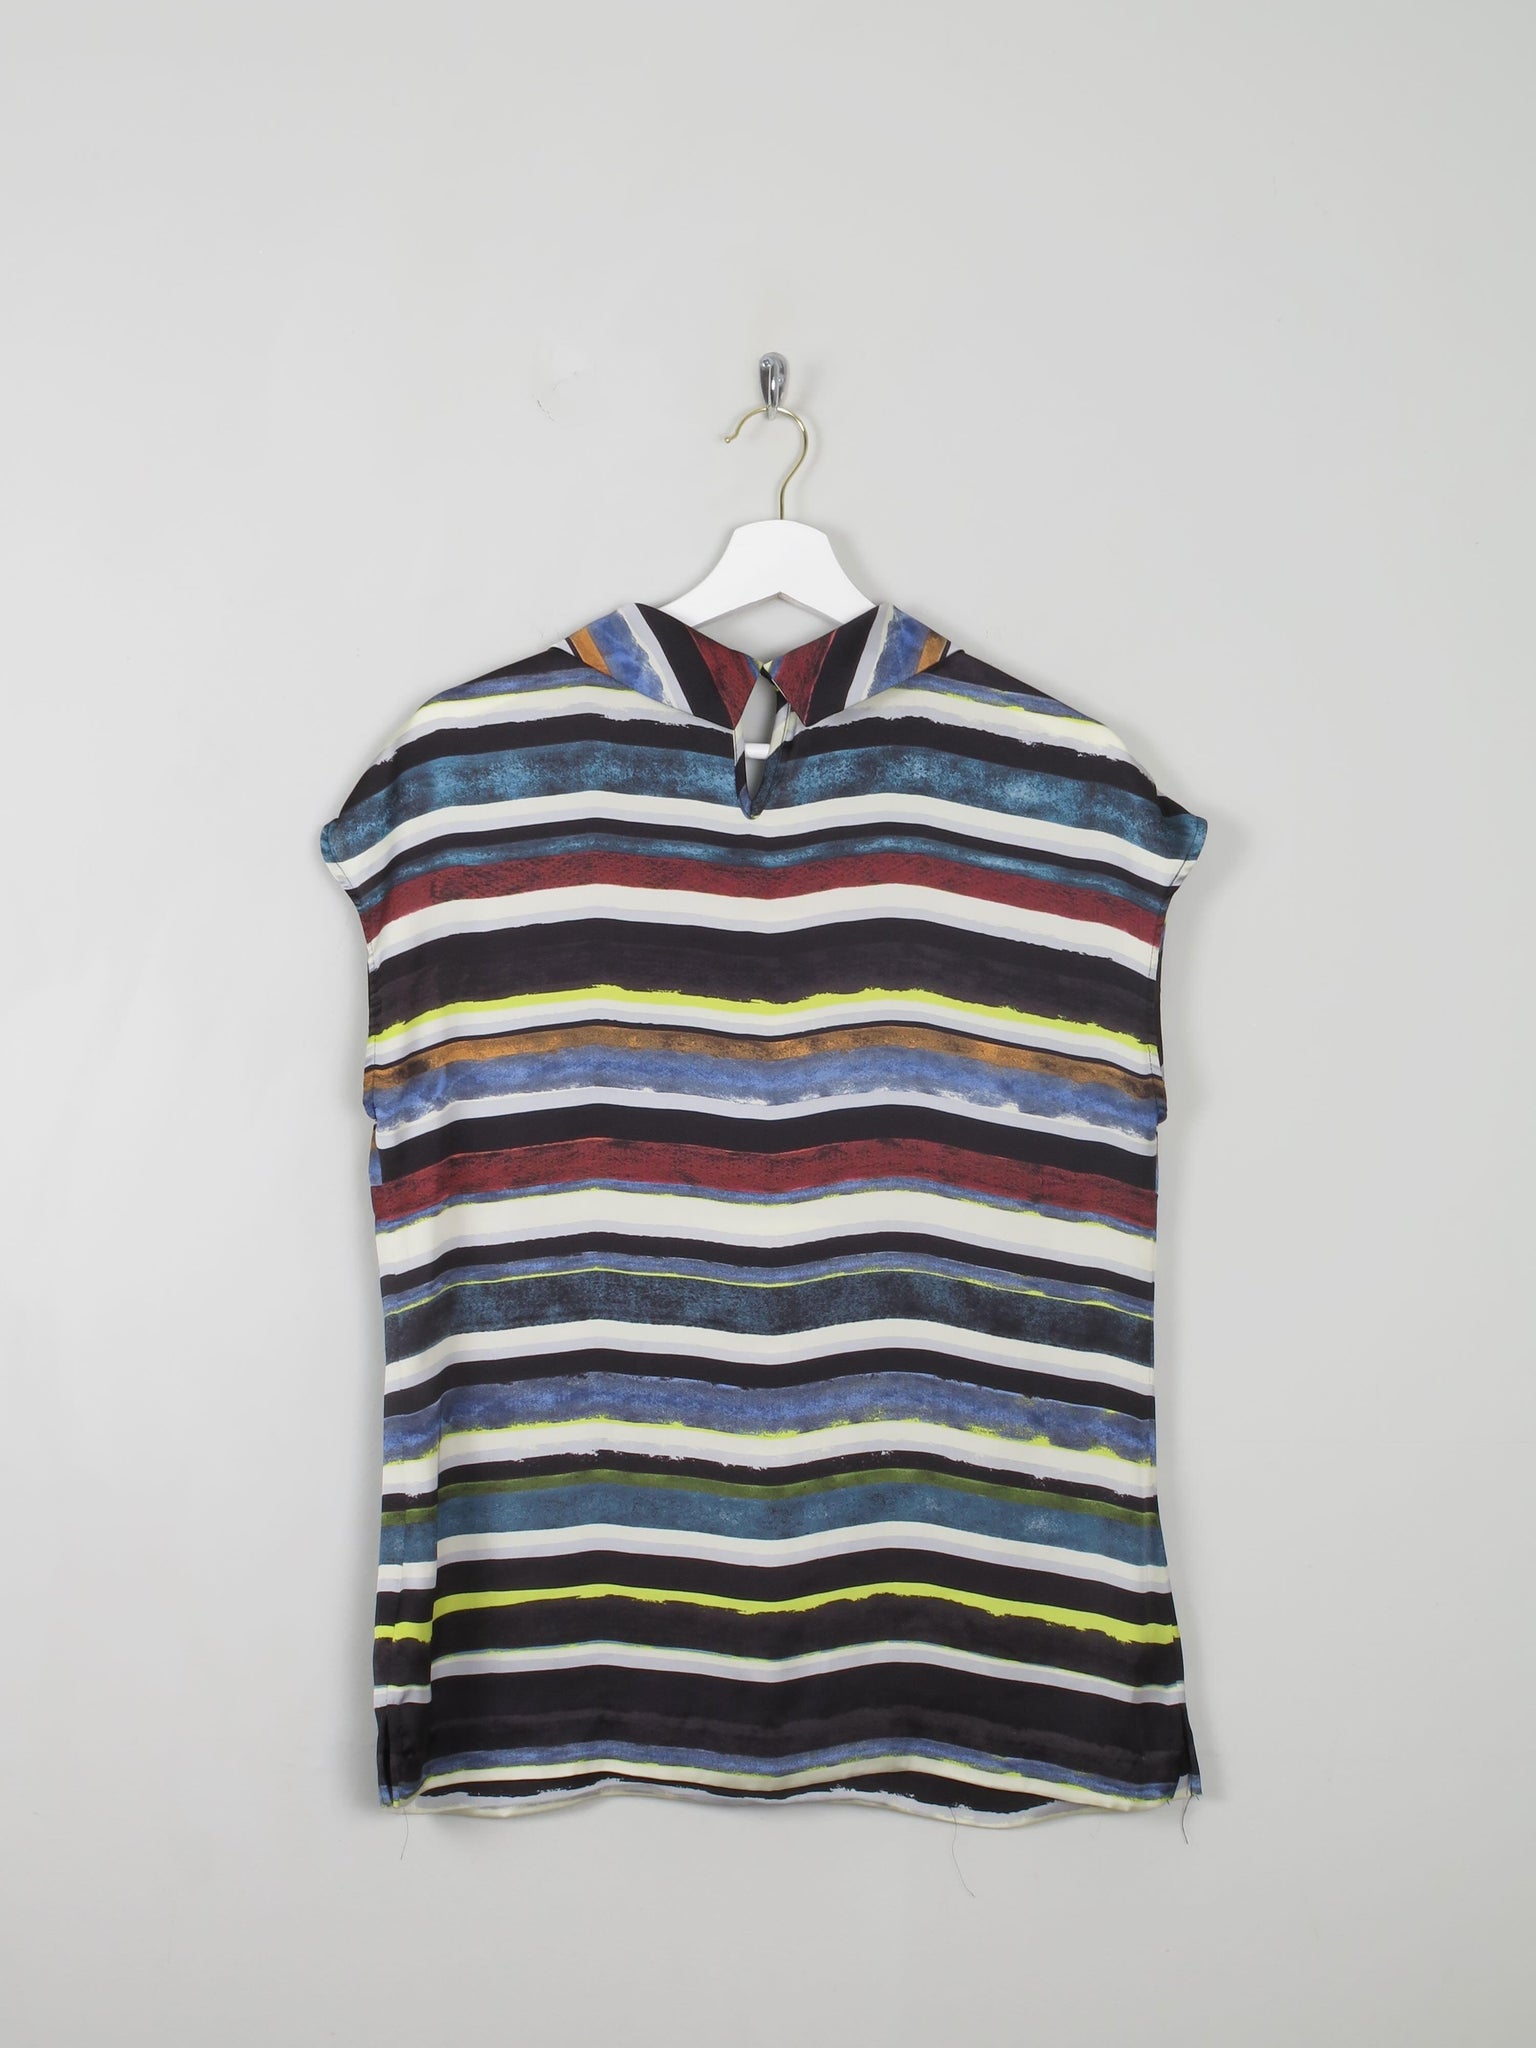 Women's Vintage Striped Sleeveless Blouse Clements Ribeiro M - The Harlequin